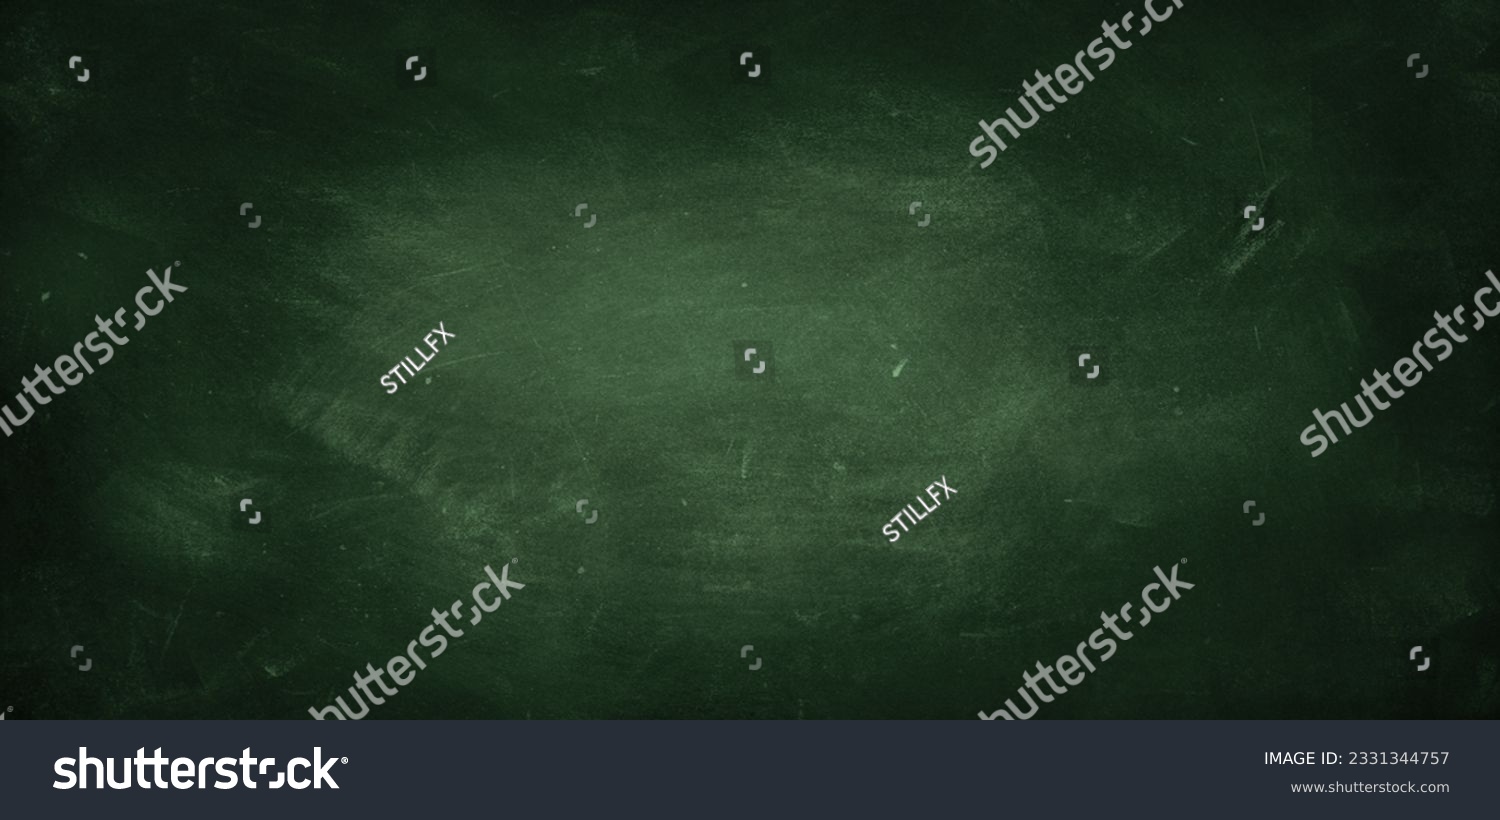 Chalk rubbed out on green chalkboard background #2331344757